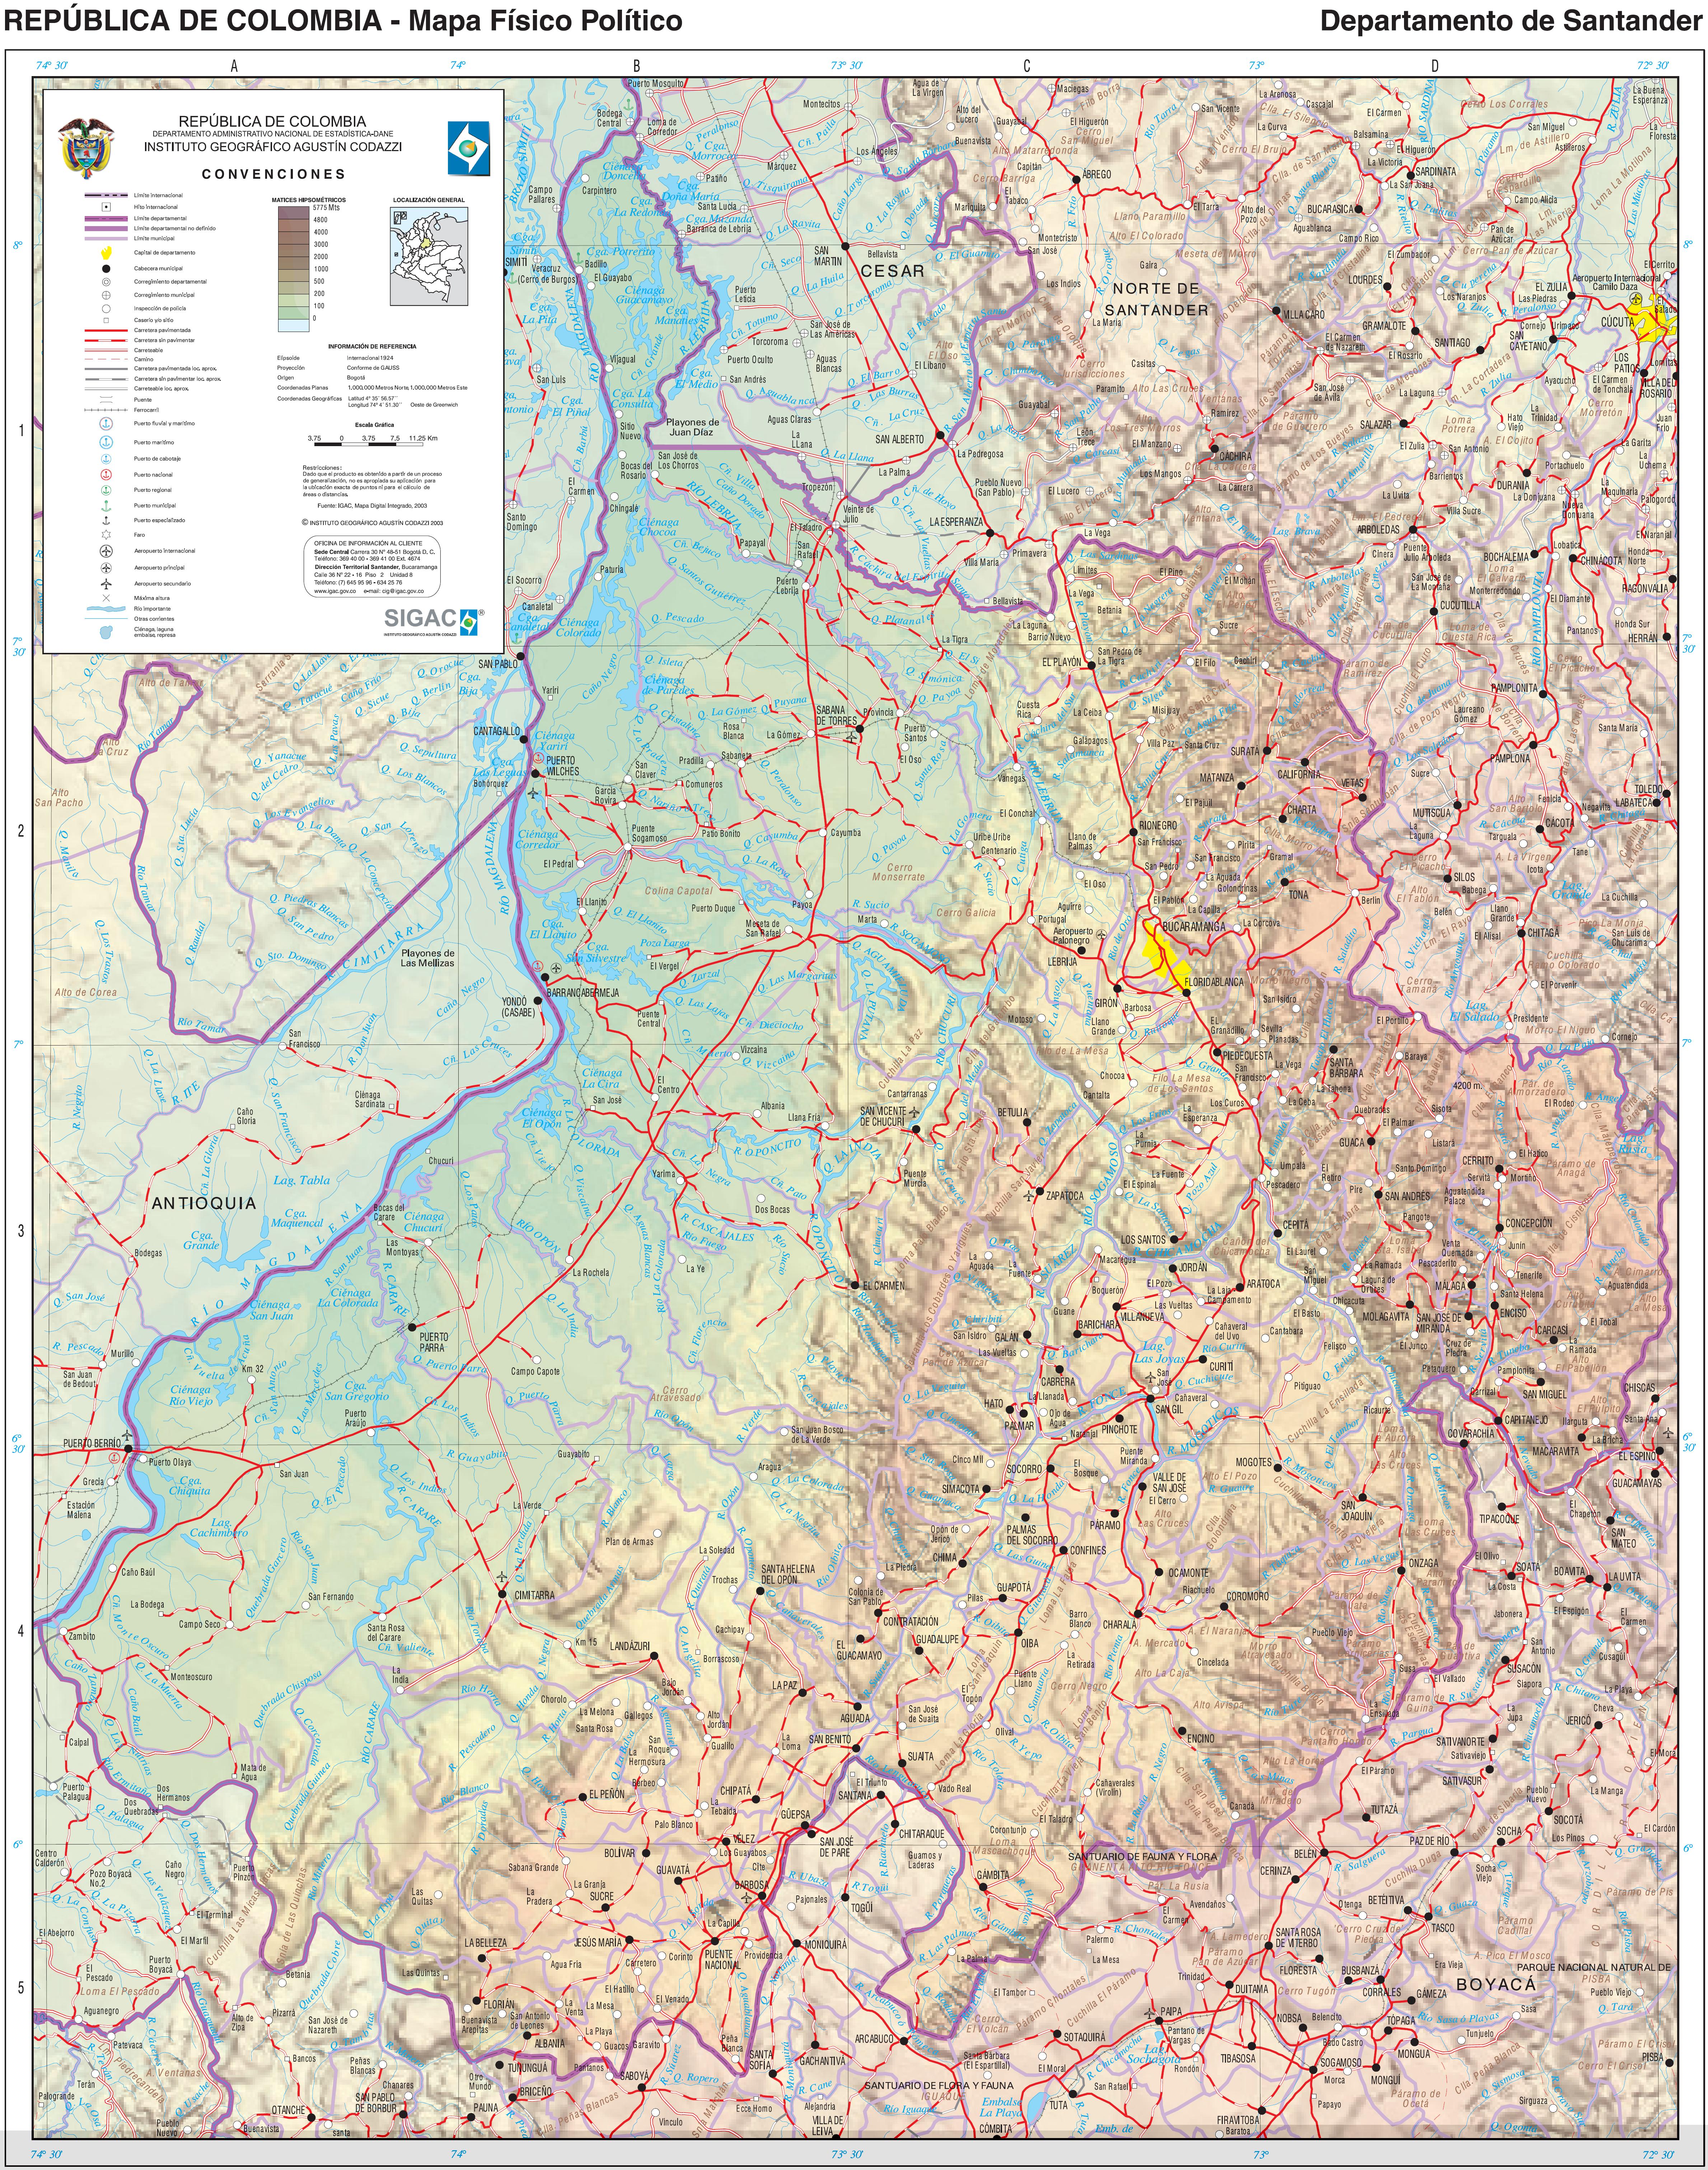 Santander map 2003 - Full size | Gifex